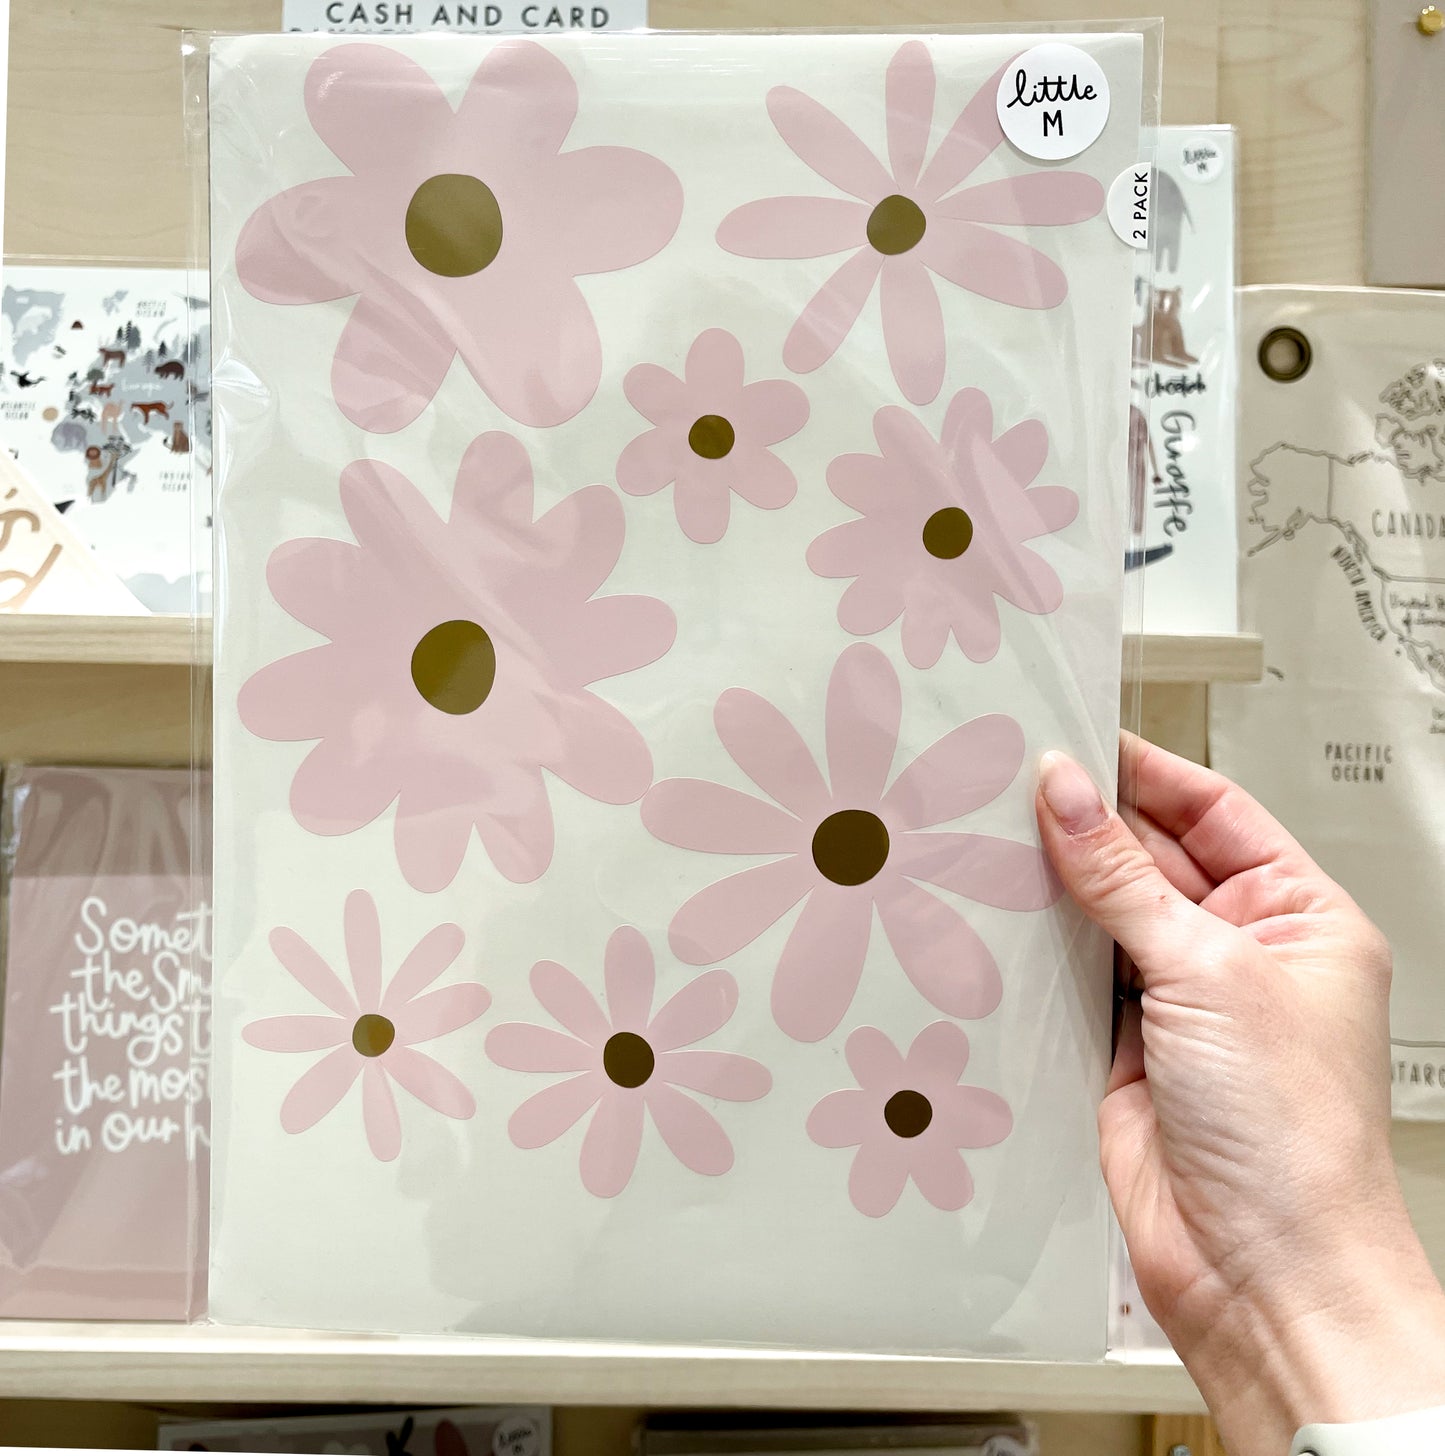 Daisy Stickers Soft Pink/Gold 2 Sheets - READY TO SHIP SALE